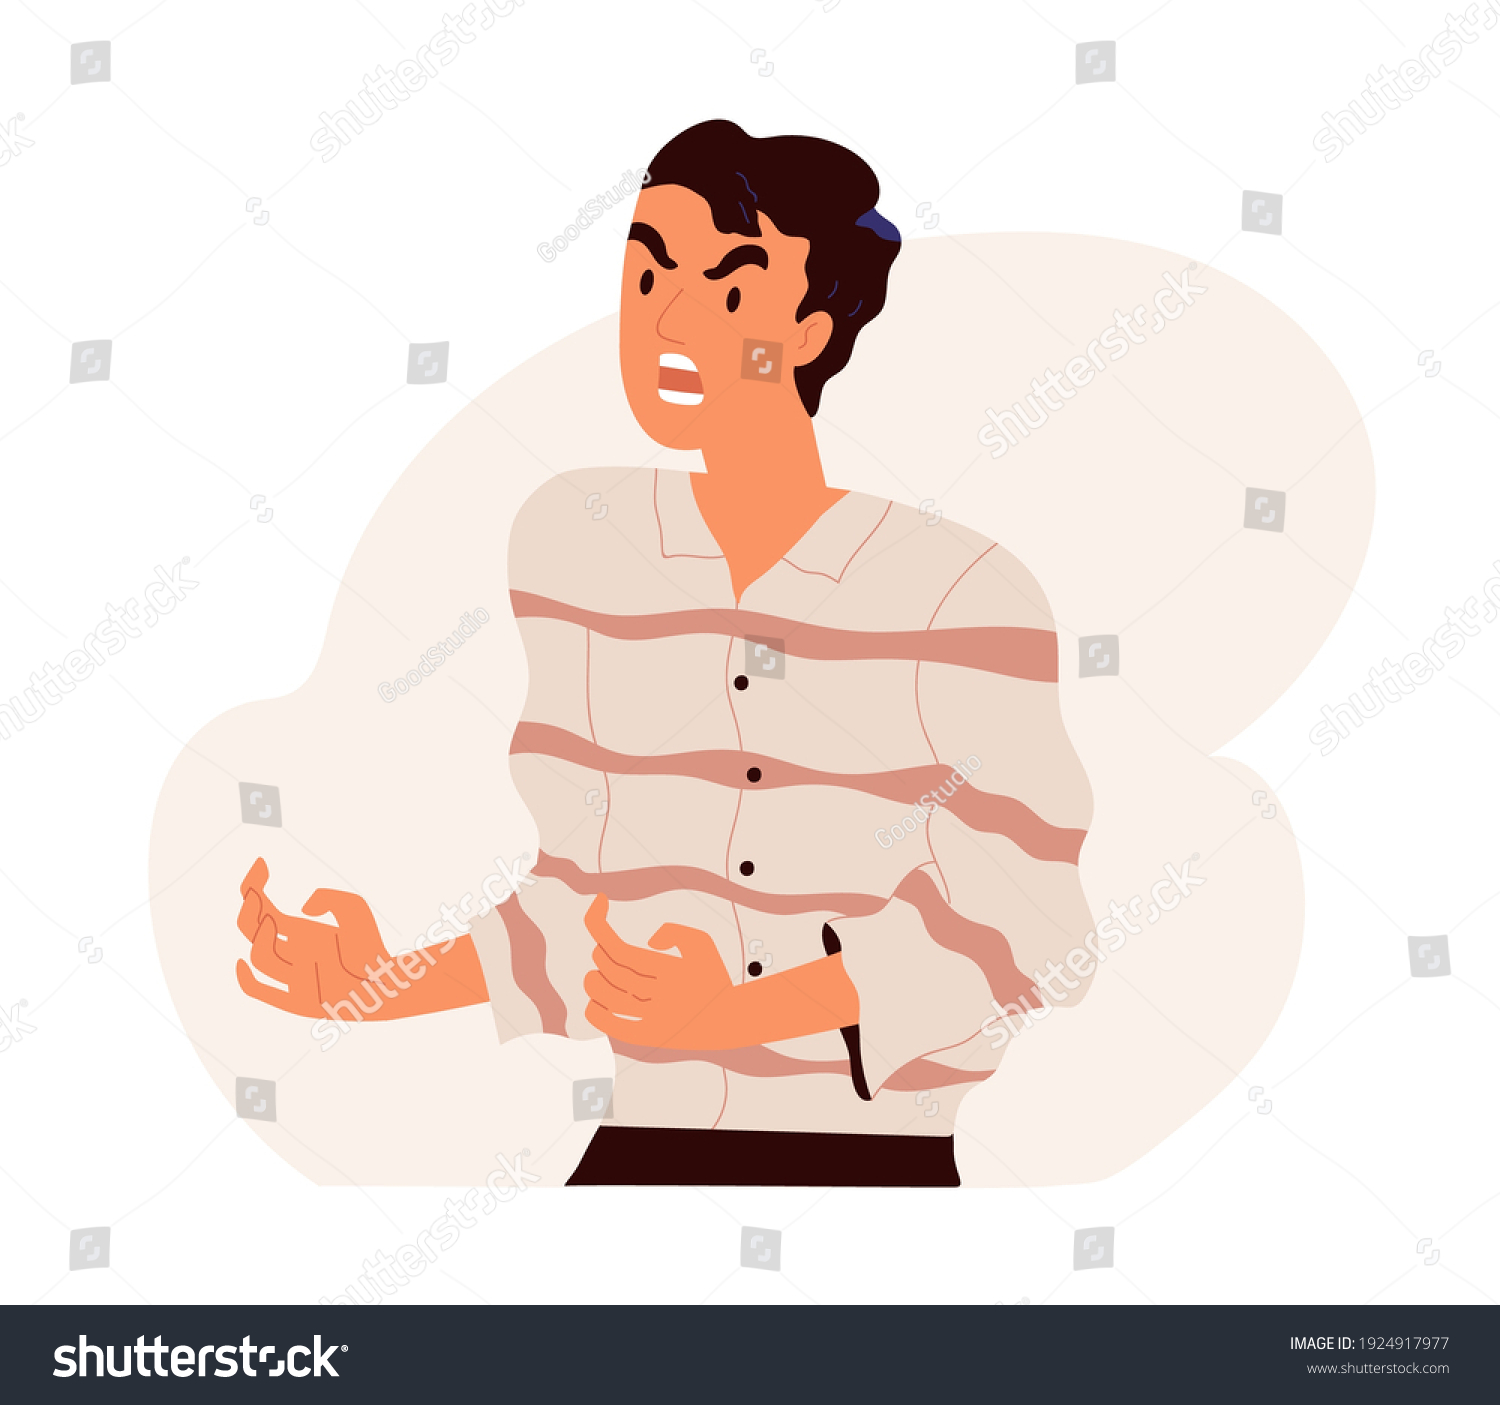 Furious angry man shouting and screaming with rage. Outraged guy with aggressive face expression scolding and yelling in anger. Colored flat vector illustration isolated on white background #1924917977